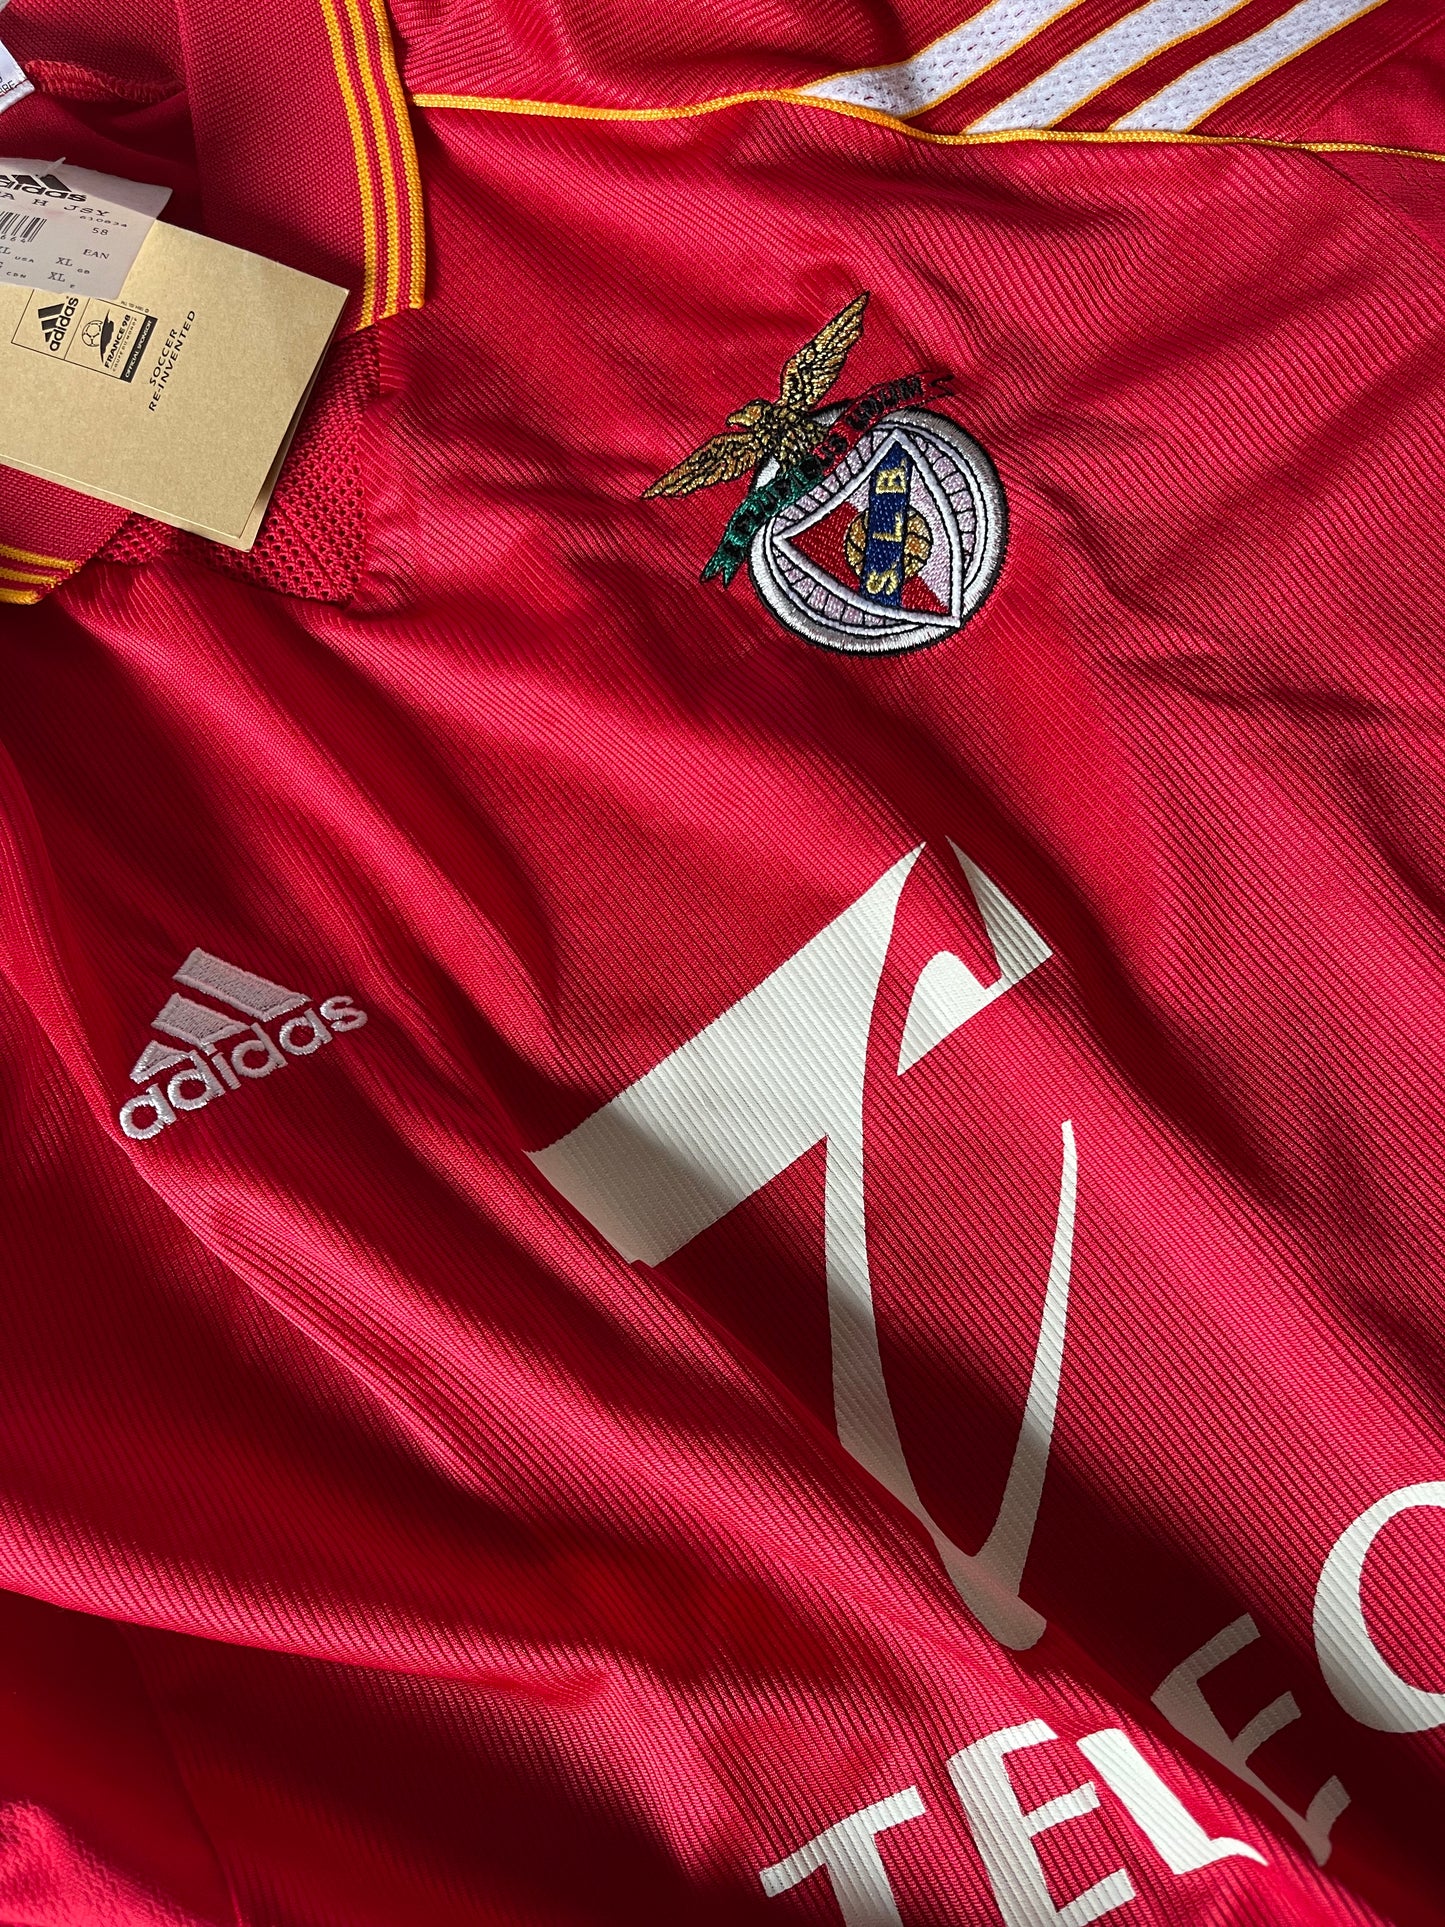 Vintage Benfica Lisbon Lisboa Adidas 1998 - 1999 Home Football Shirt Red Size XL Telecel Made in England Red BNWT New NOS OG DS